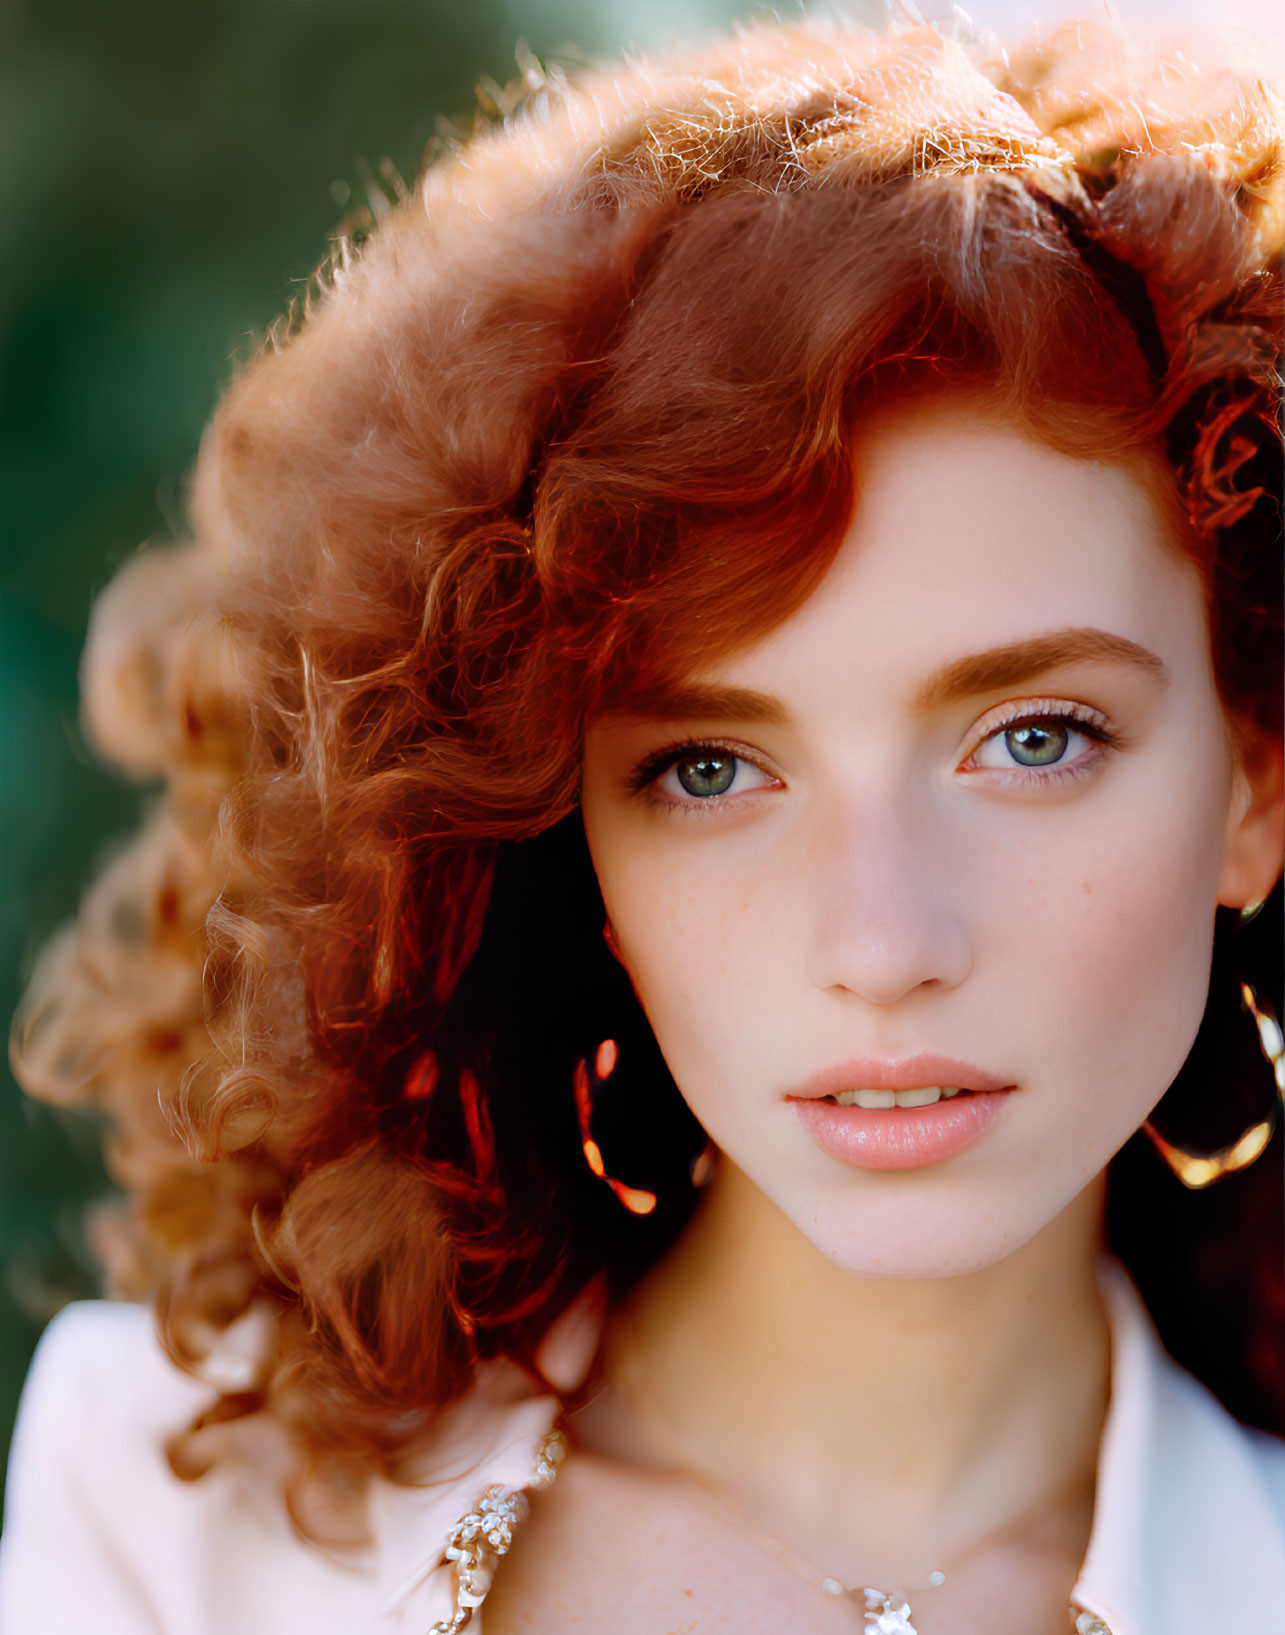 Portrait of Young Woman with Curly Red Hair and Captivating Eyes